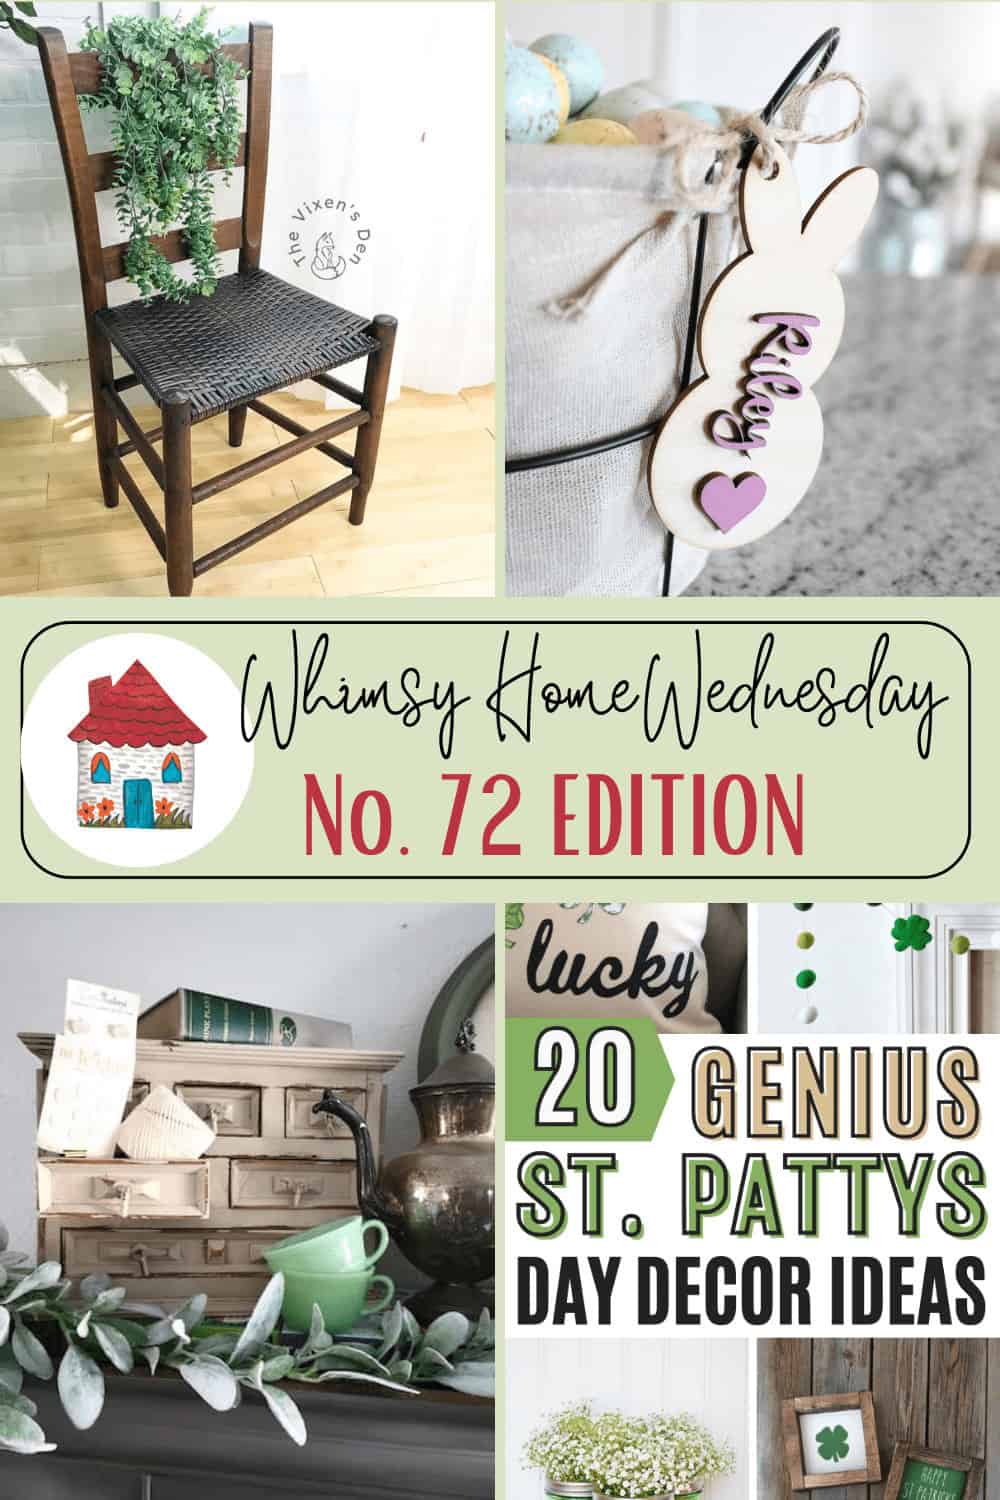 Whimsy Home Wednesday No. 72